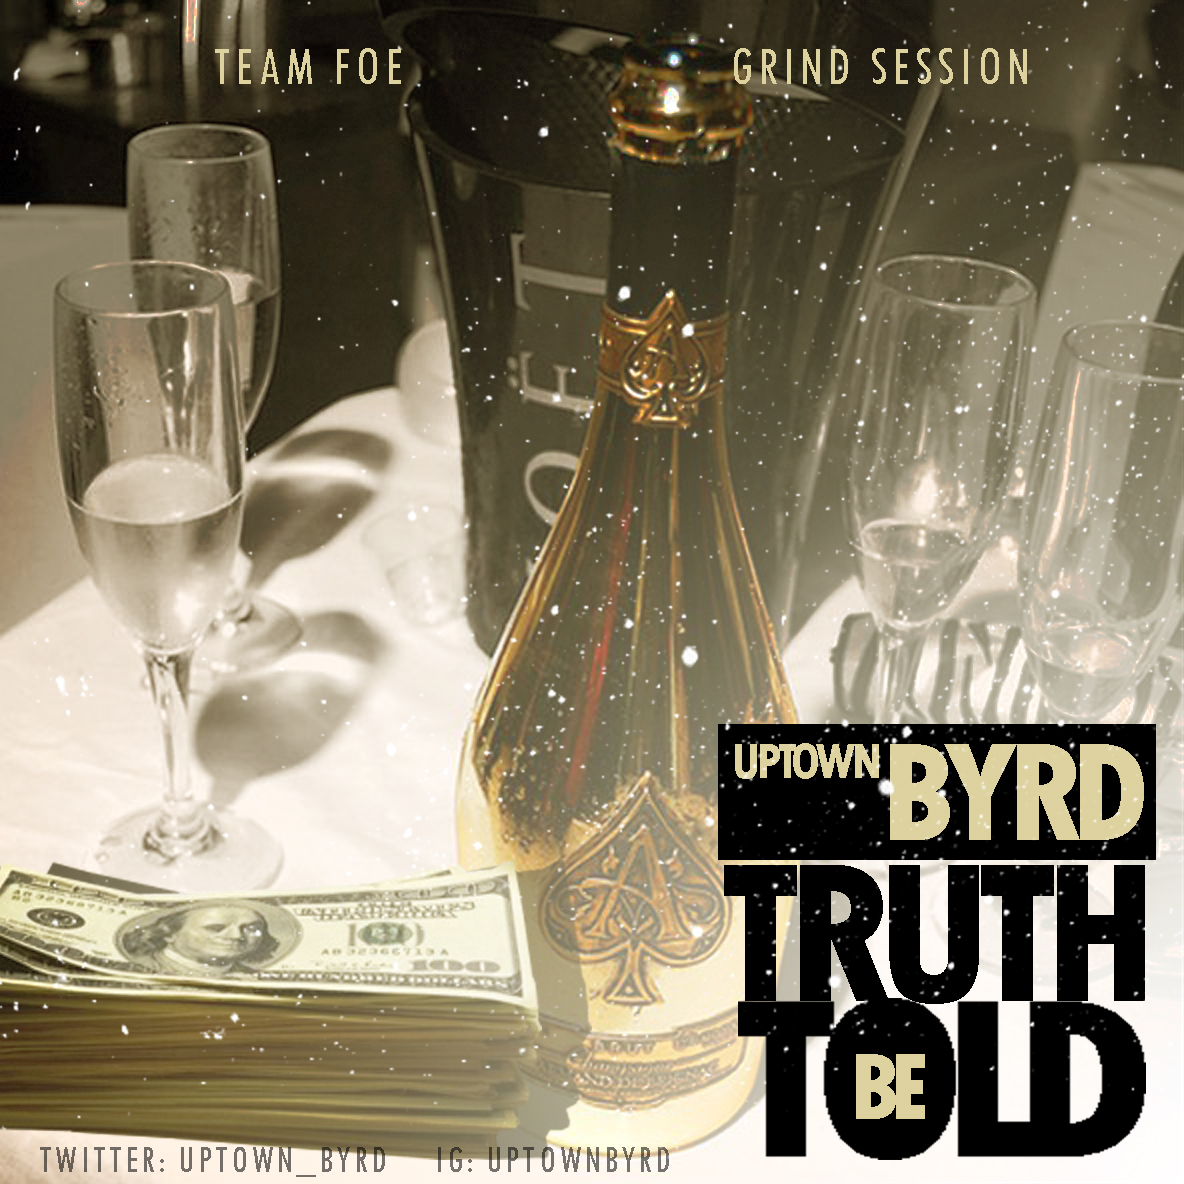 uptown-byrd-truth-be-told-HHS1987-2013 Uptown Byrd - Truth Be Told  